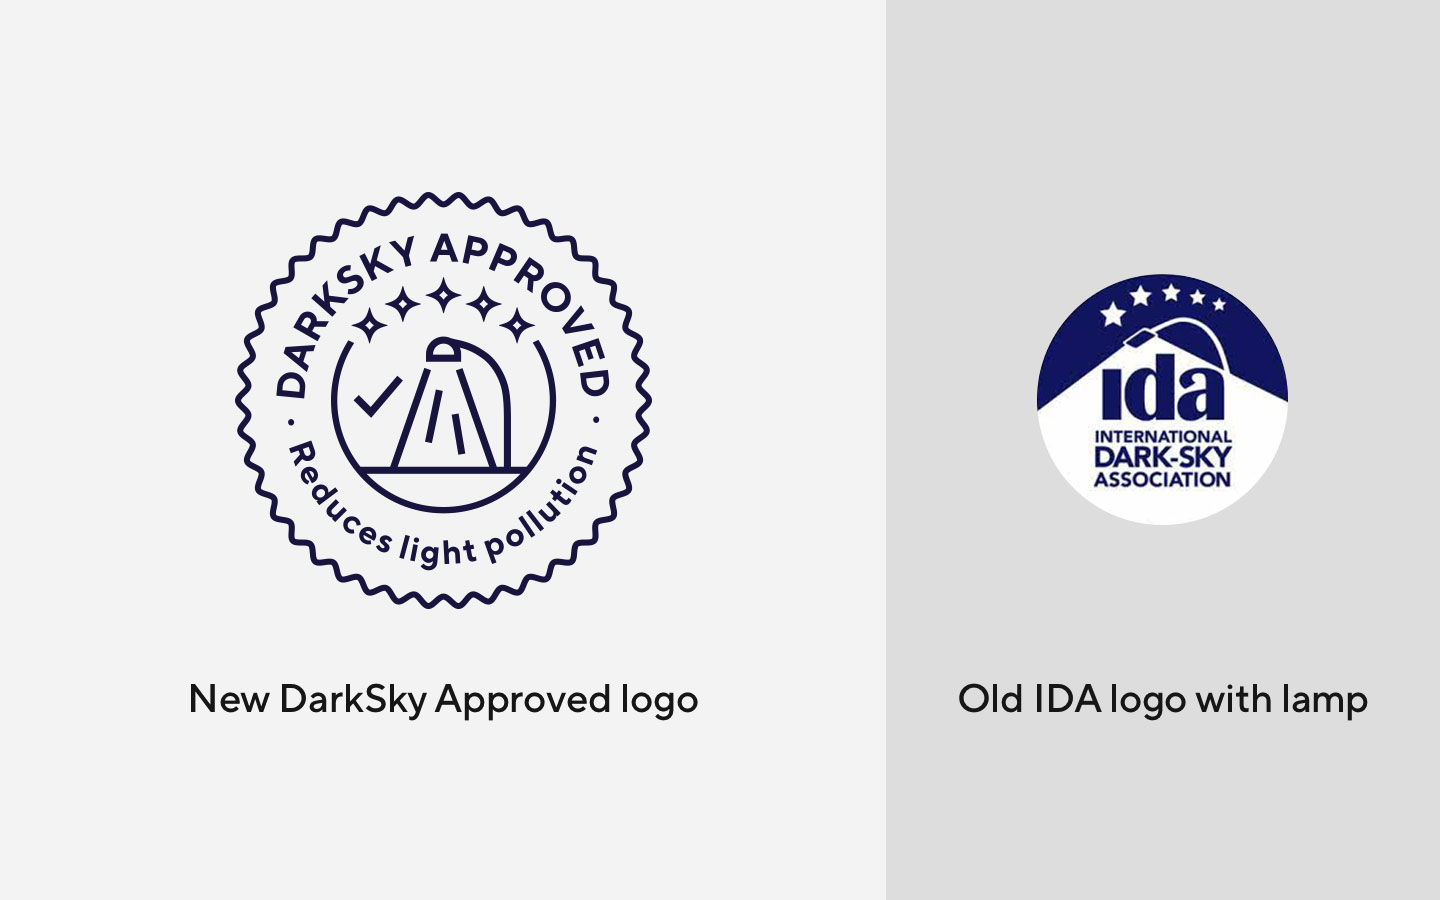 DarkSky Approved logo next to old IDA logo featuring a lamp.